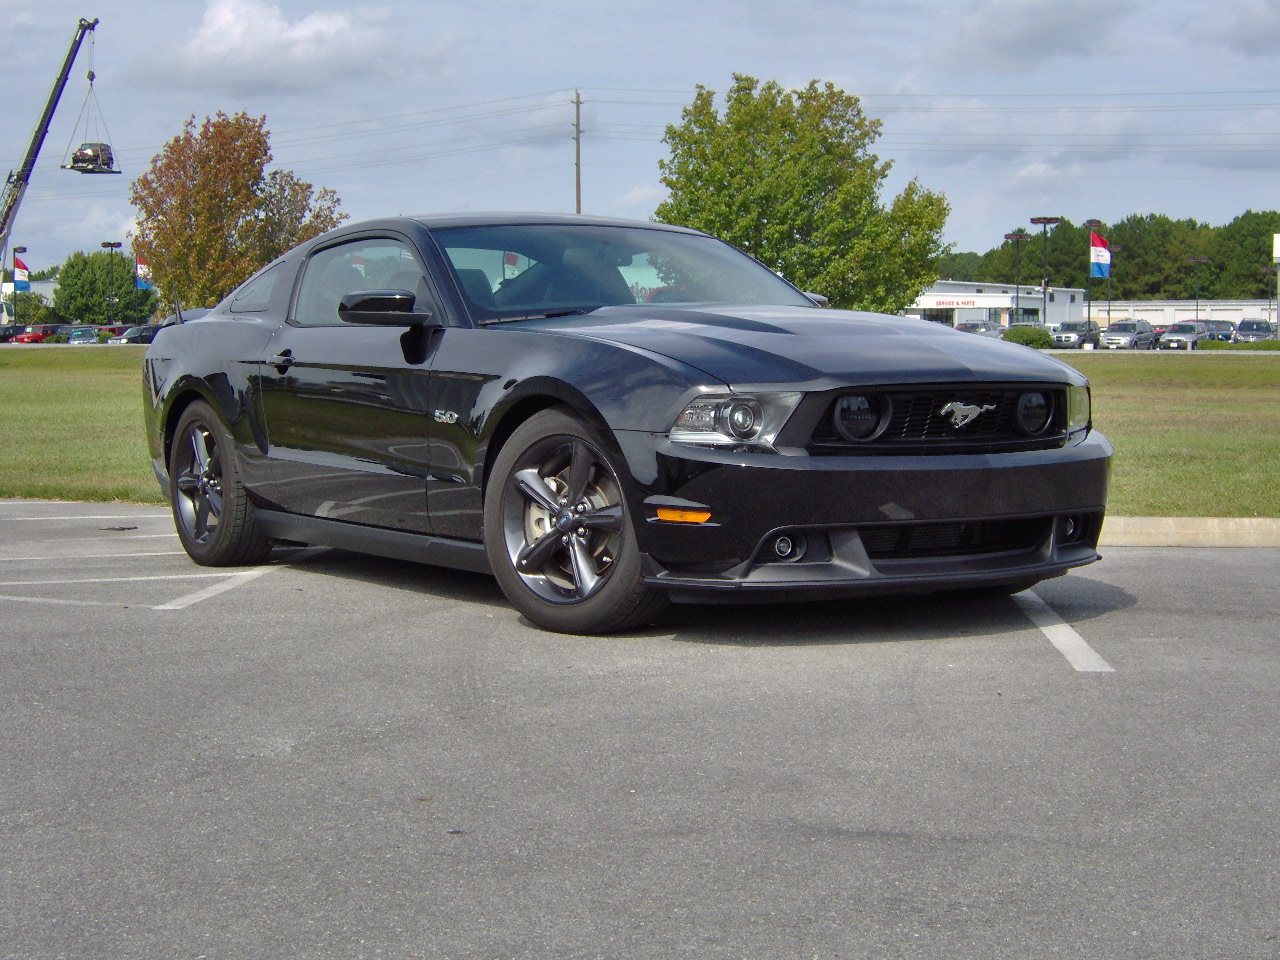 2011 Ford mustang gt 1/4 mile times #1